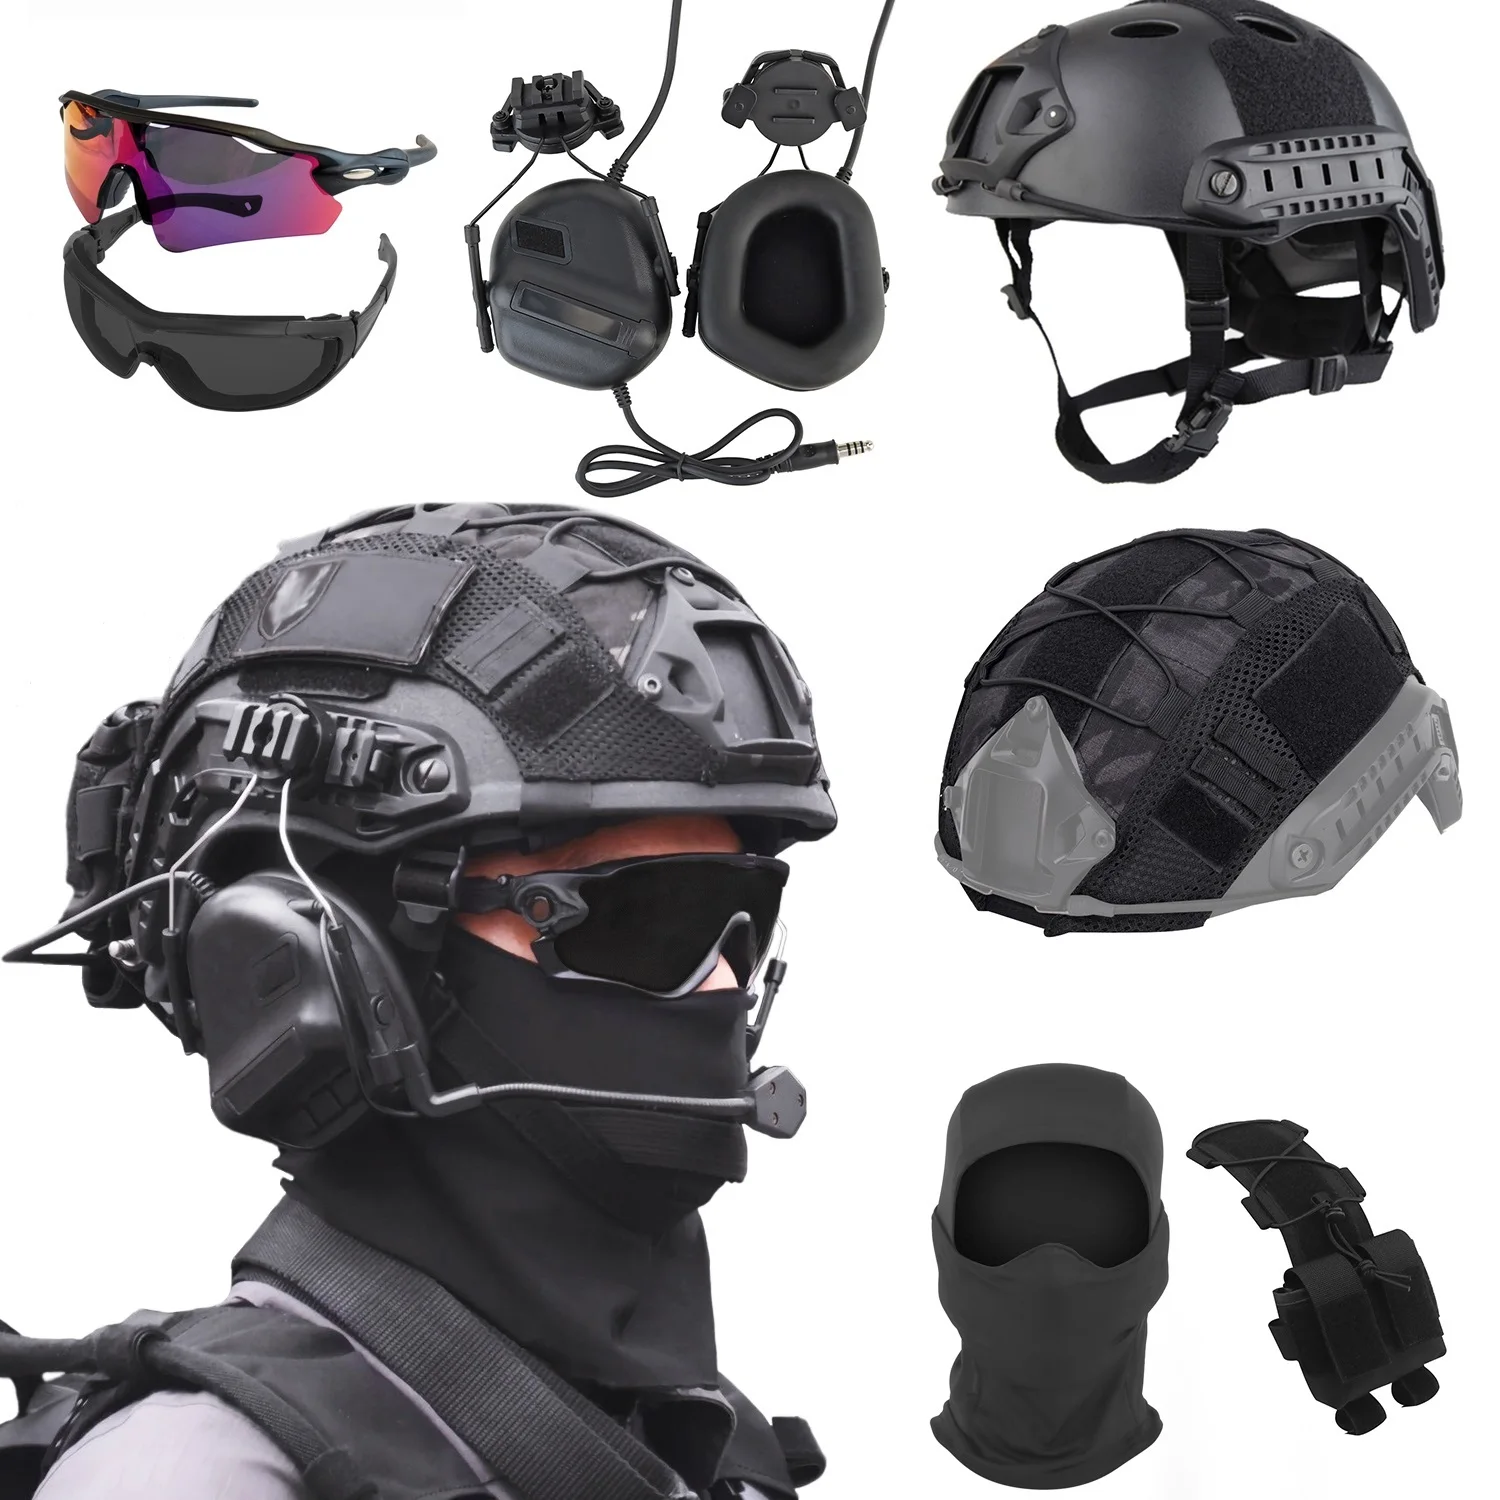 

FAST Tactical Airsoft Helmet Gear - 7 Pack - Tactical Headset - Helmet Cover - 2 PCS Safety Glasses - Etc - for Airsoft War Game